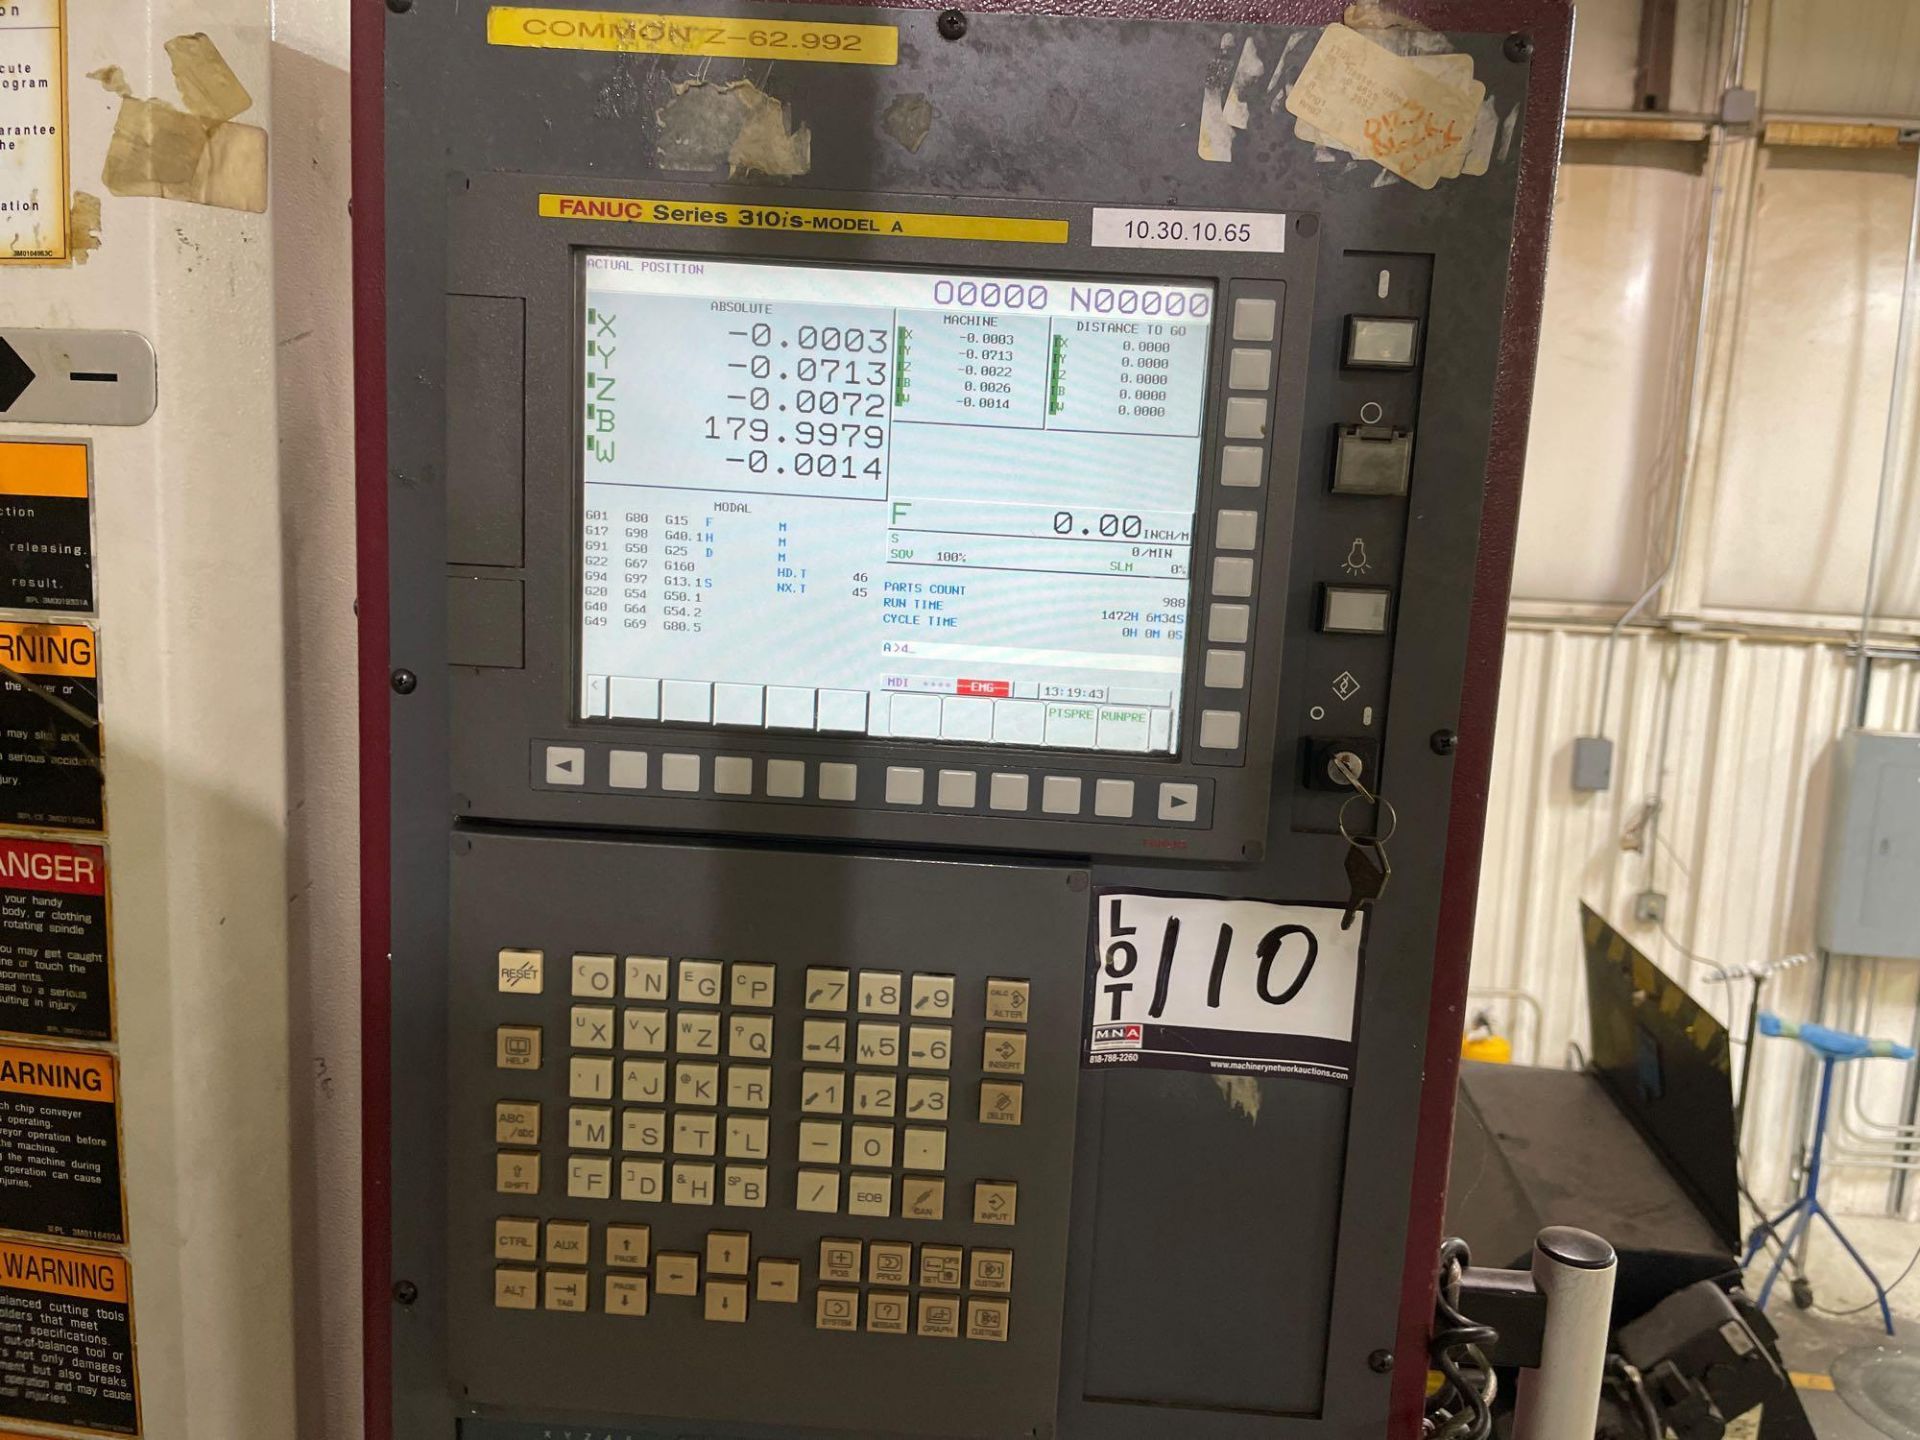 OKK HM1250S 4-Axis, Fanuc 310iS Model A ctrl, 49.2" pllts, 8k RPM, CT50, 80 ATC, CTS, s/n 103 - Image 9 of 18